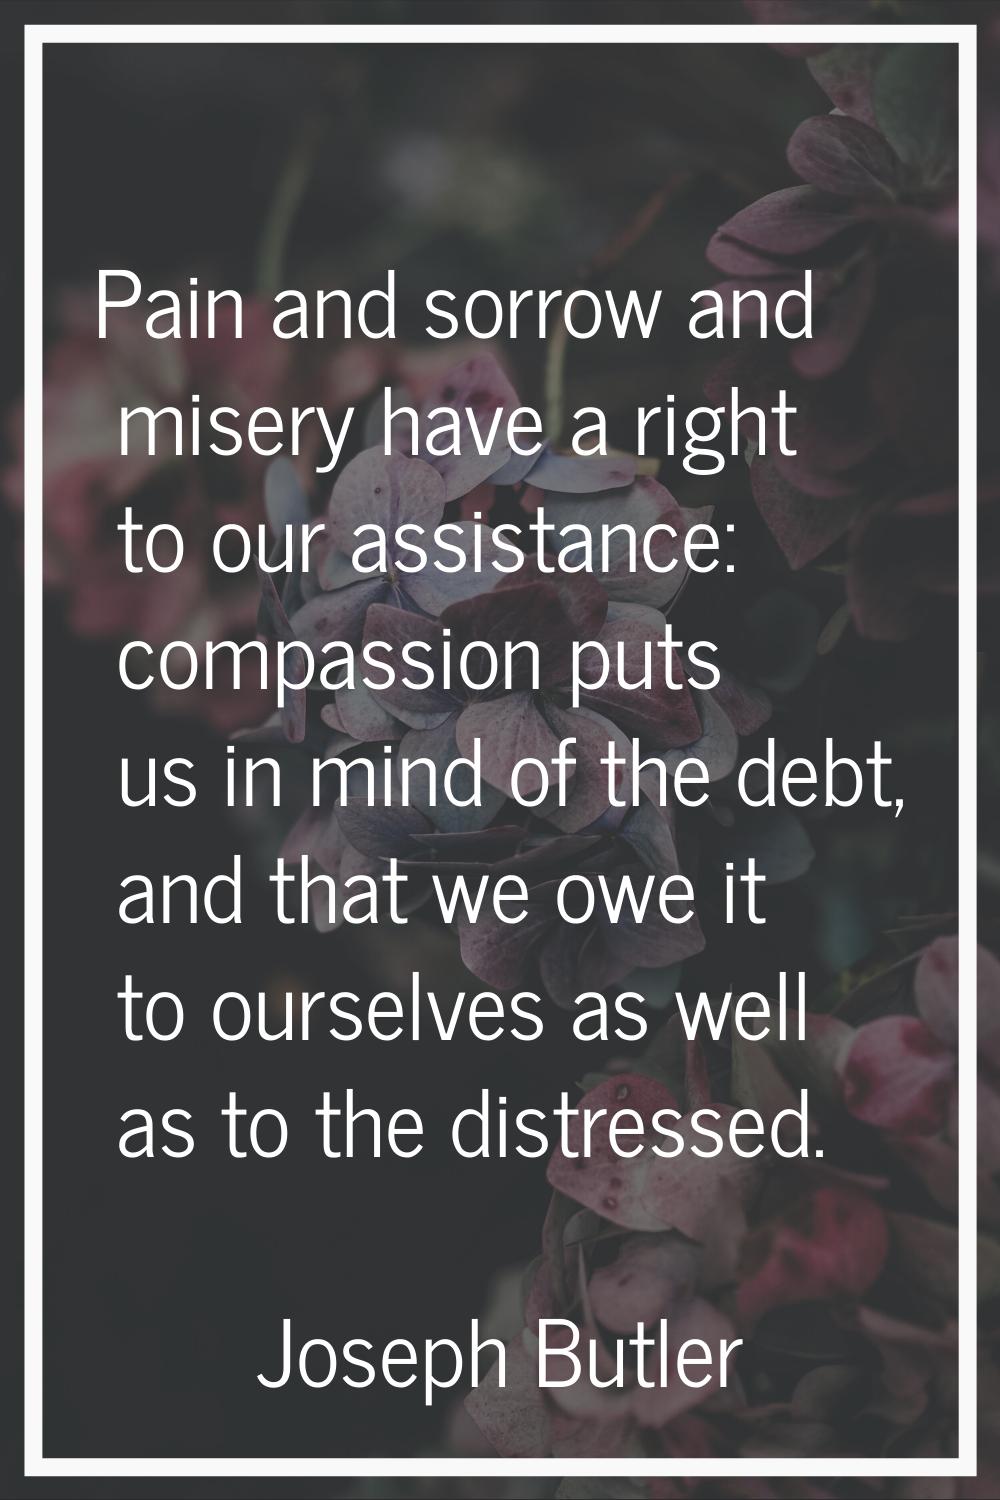 Pain and sorrow and misery have a right to our assistance: compassion puts us in mind of the debt, 